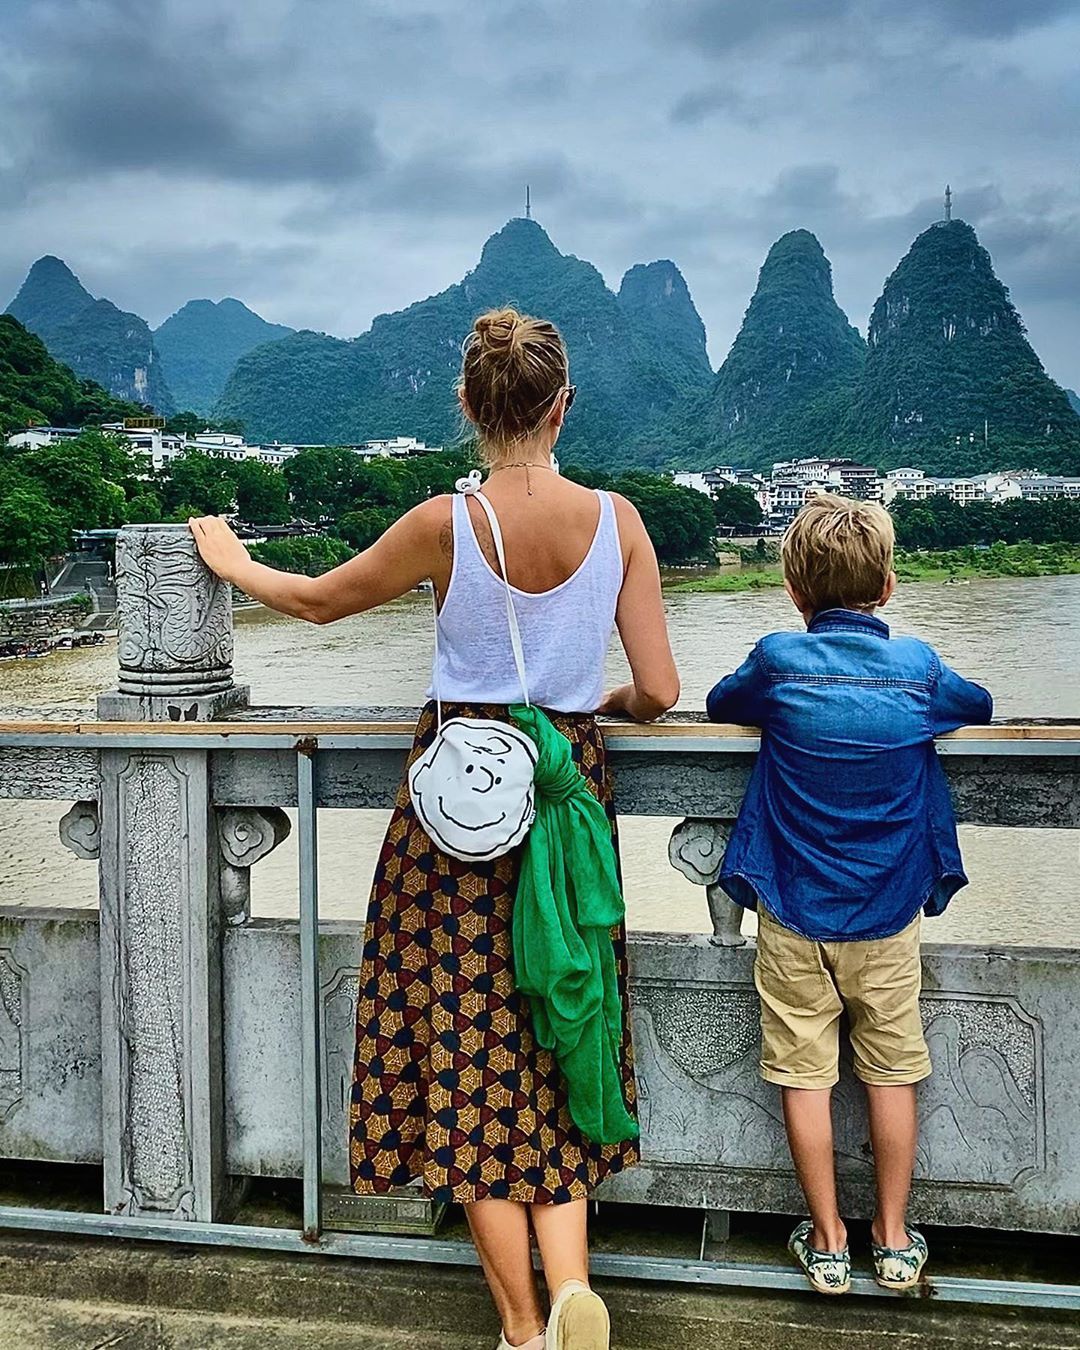 Mother and her son in China